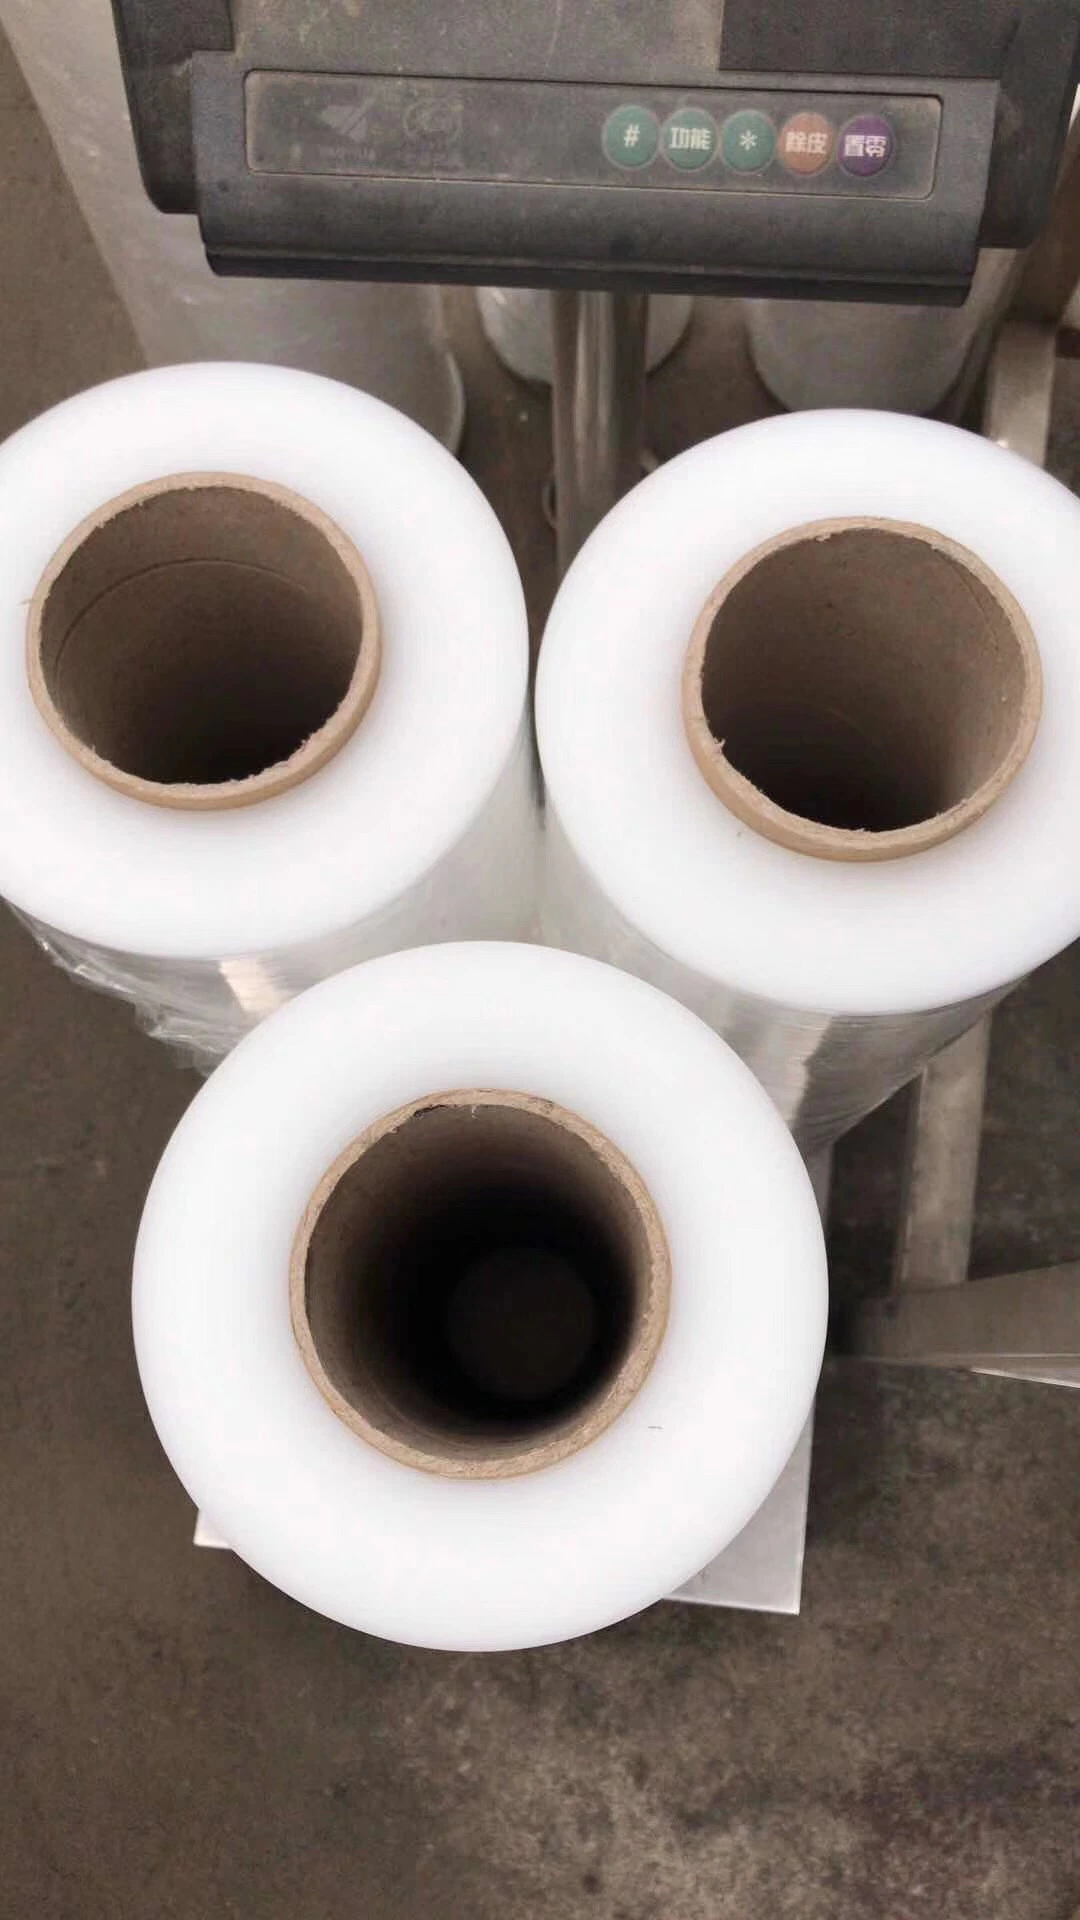 Plastic Wrapping Film for Machine Use